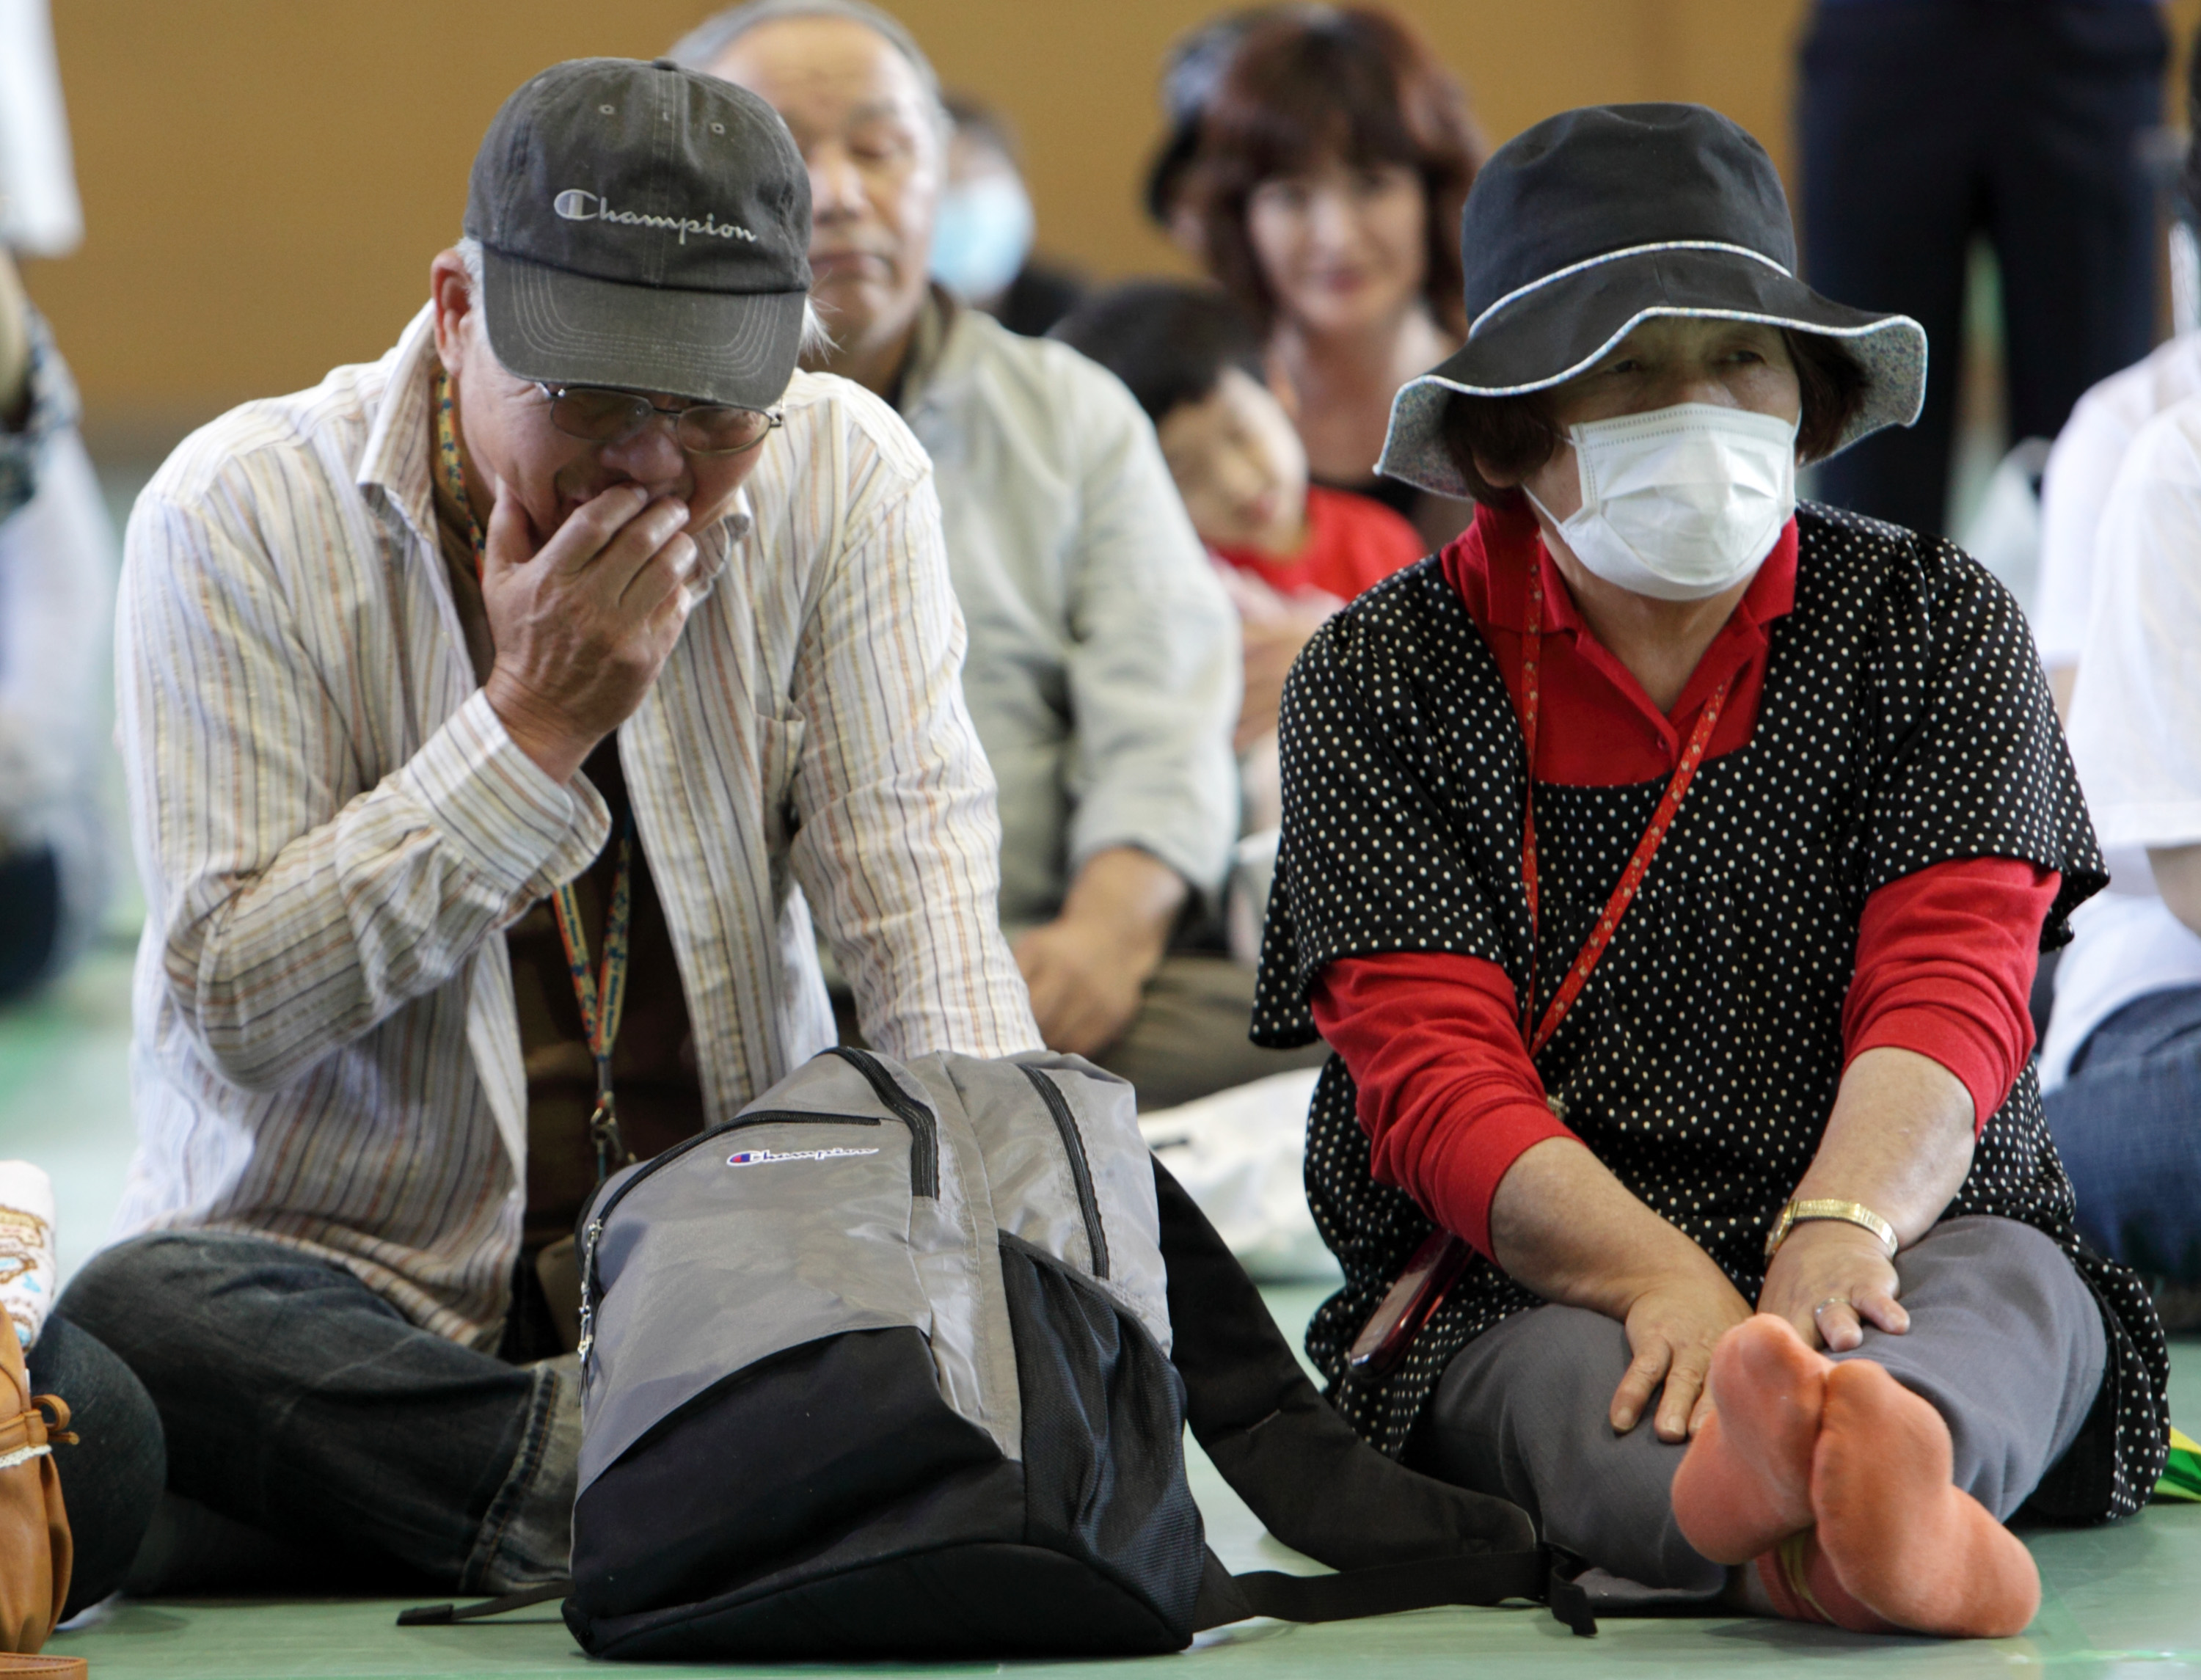 Just the beginning: Evacuees from the 20-km exclusion zone around Tokyo Electric Power Co.'s Fukushima No. 1 nuclear power station attend an event marking three months since the March 11 earthquake and tsunami, in Minamisoma, Fukushima Prefecture, on June 11, 2011. | BLOOMBERG